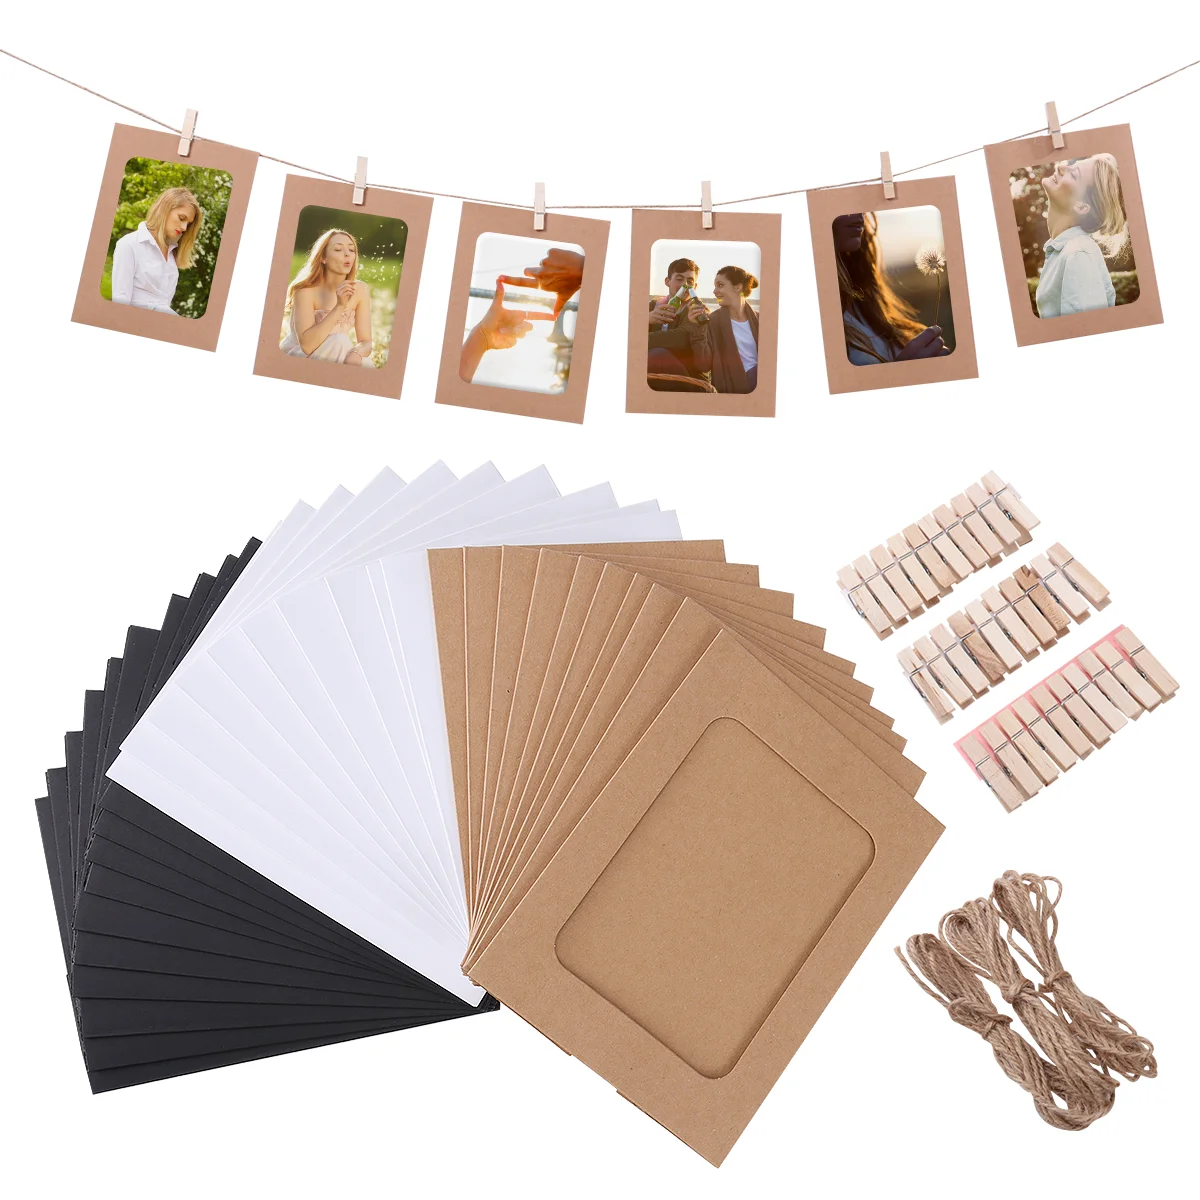 

Photo Frames Hanging Wall Decoration 30pcs DIY Kraft Paper with Clips and Ropes Set Picture hanger